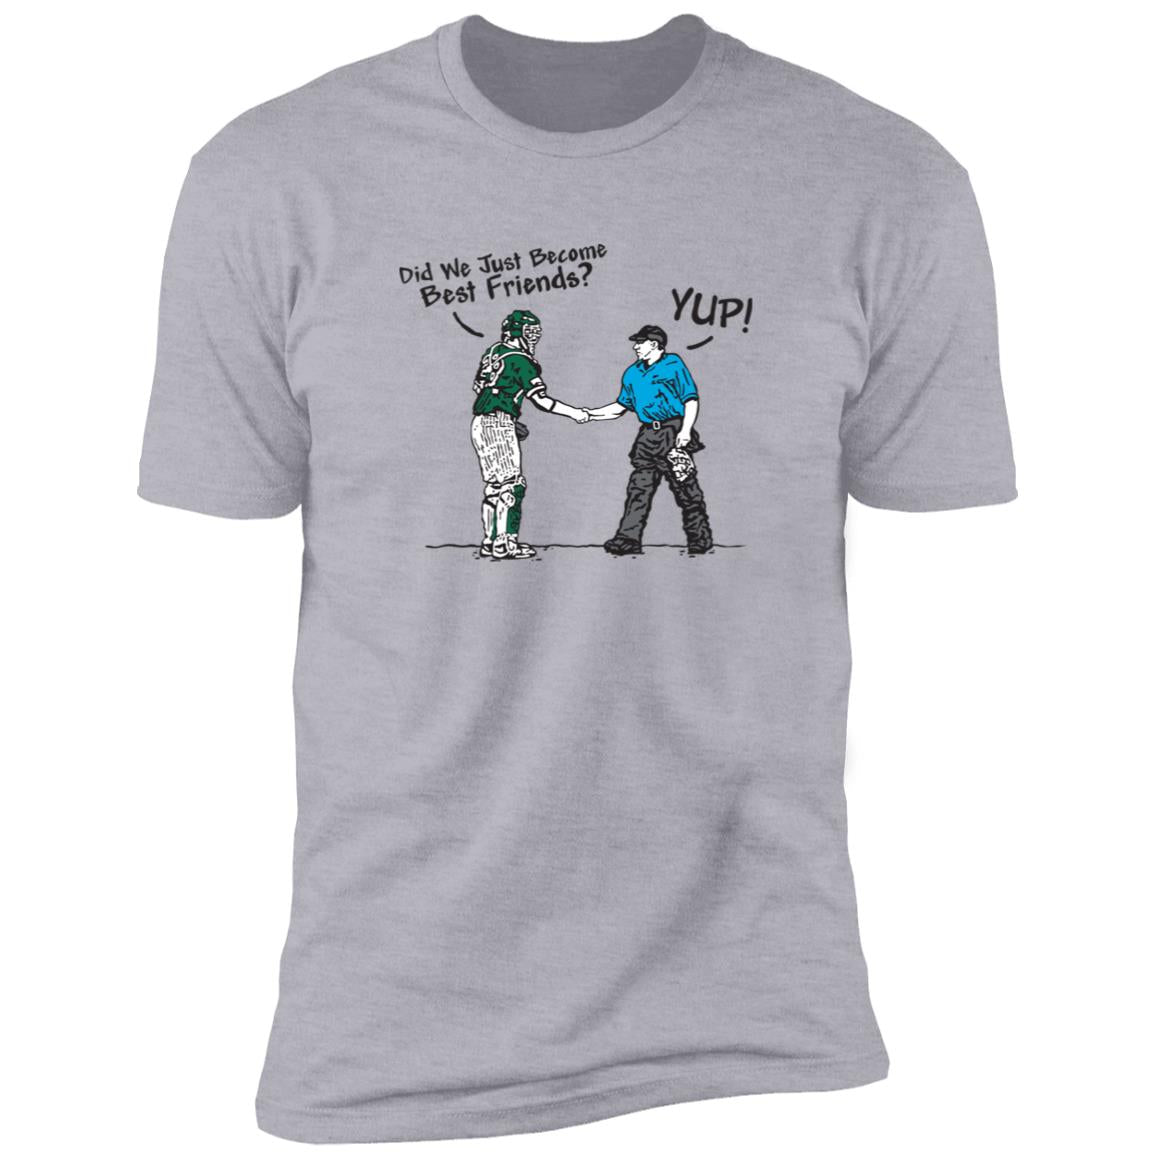 The Catching Guy Best Friends Tee grey